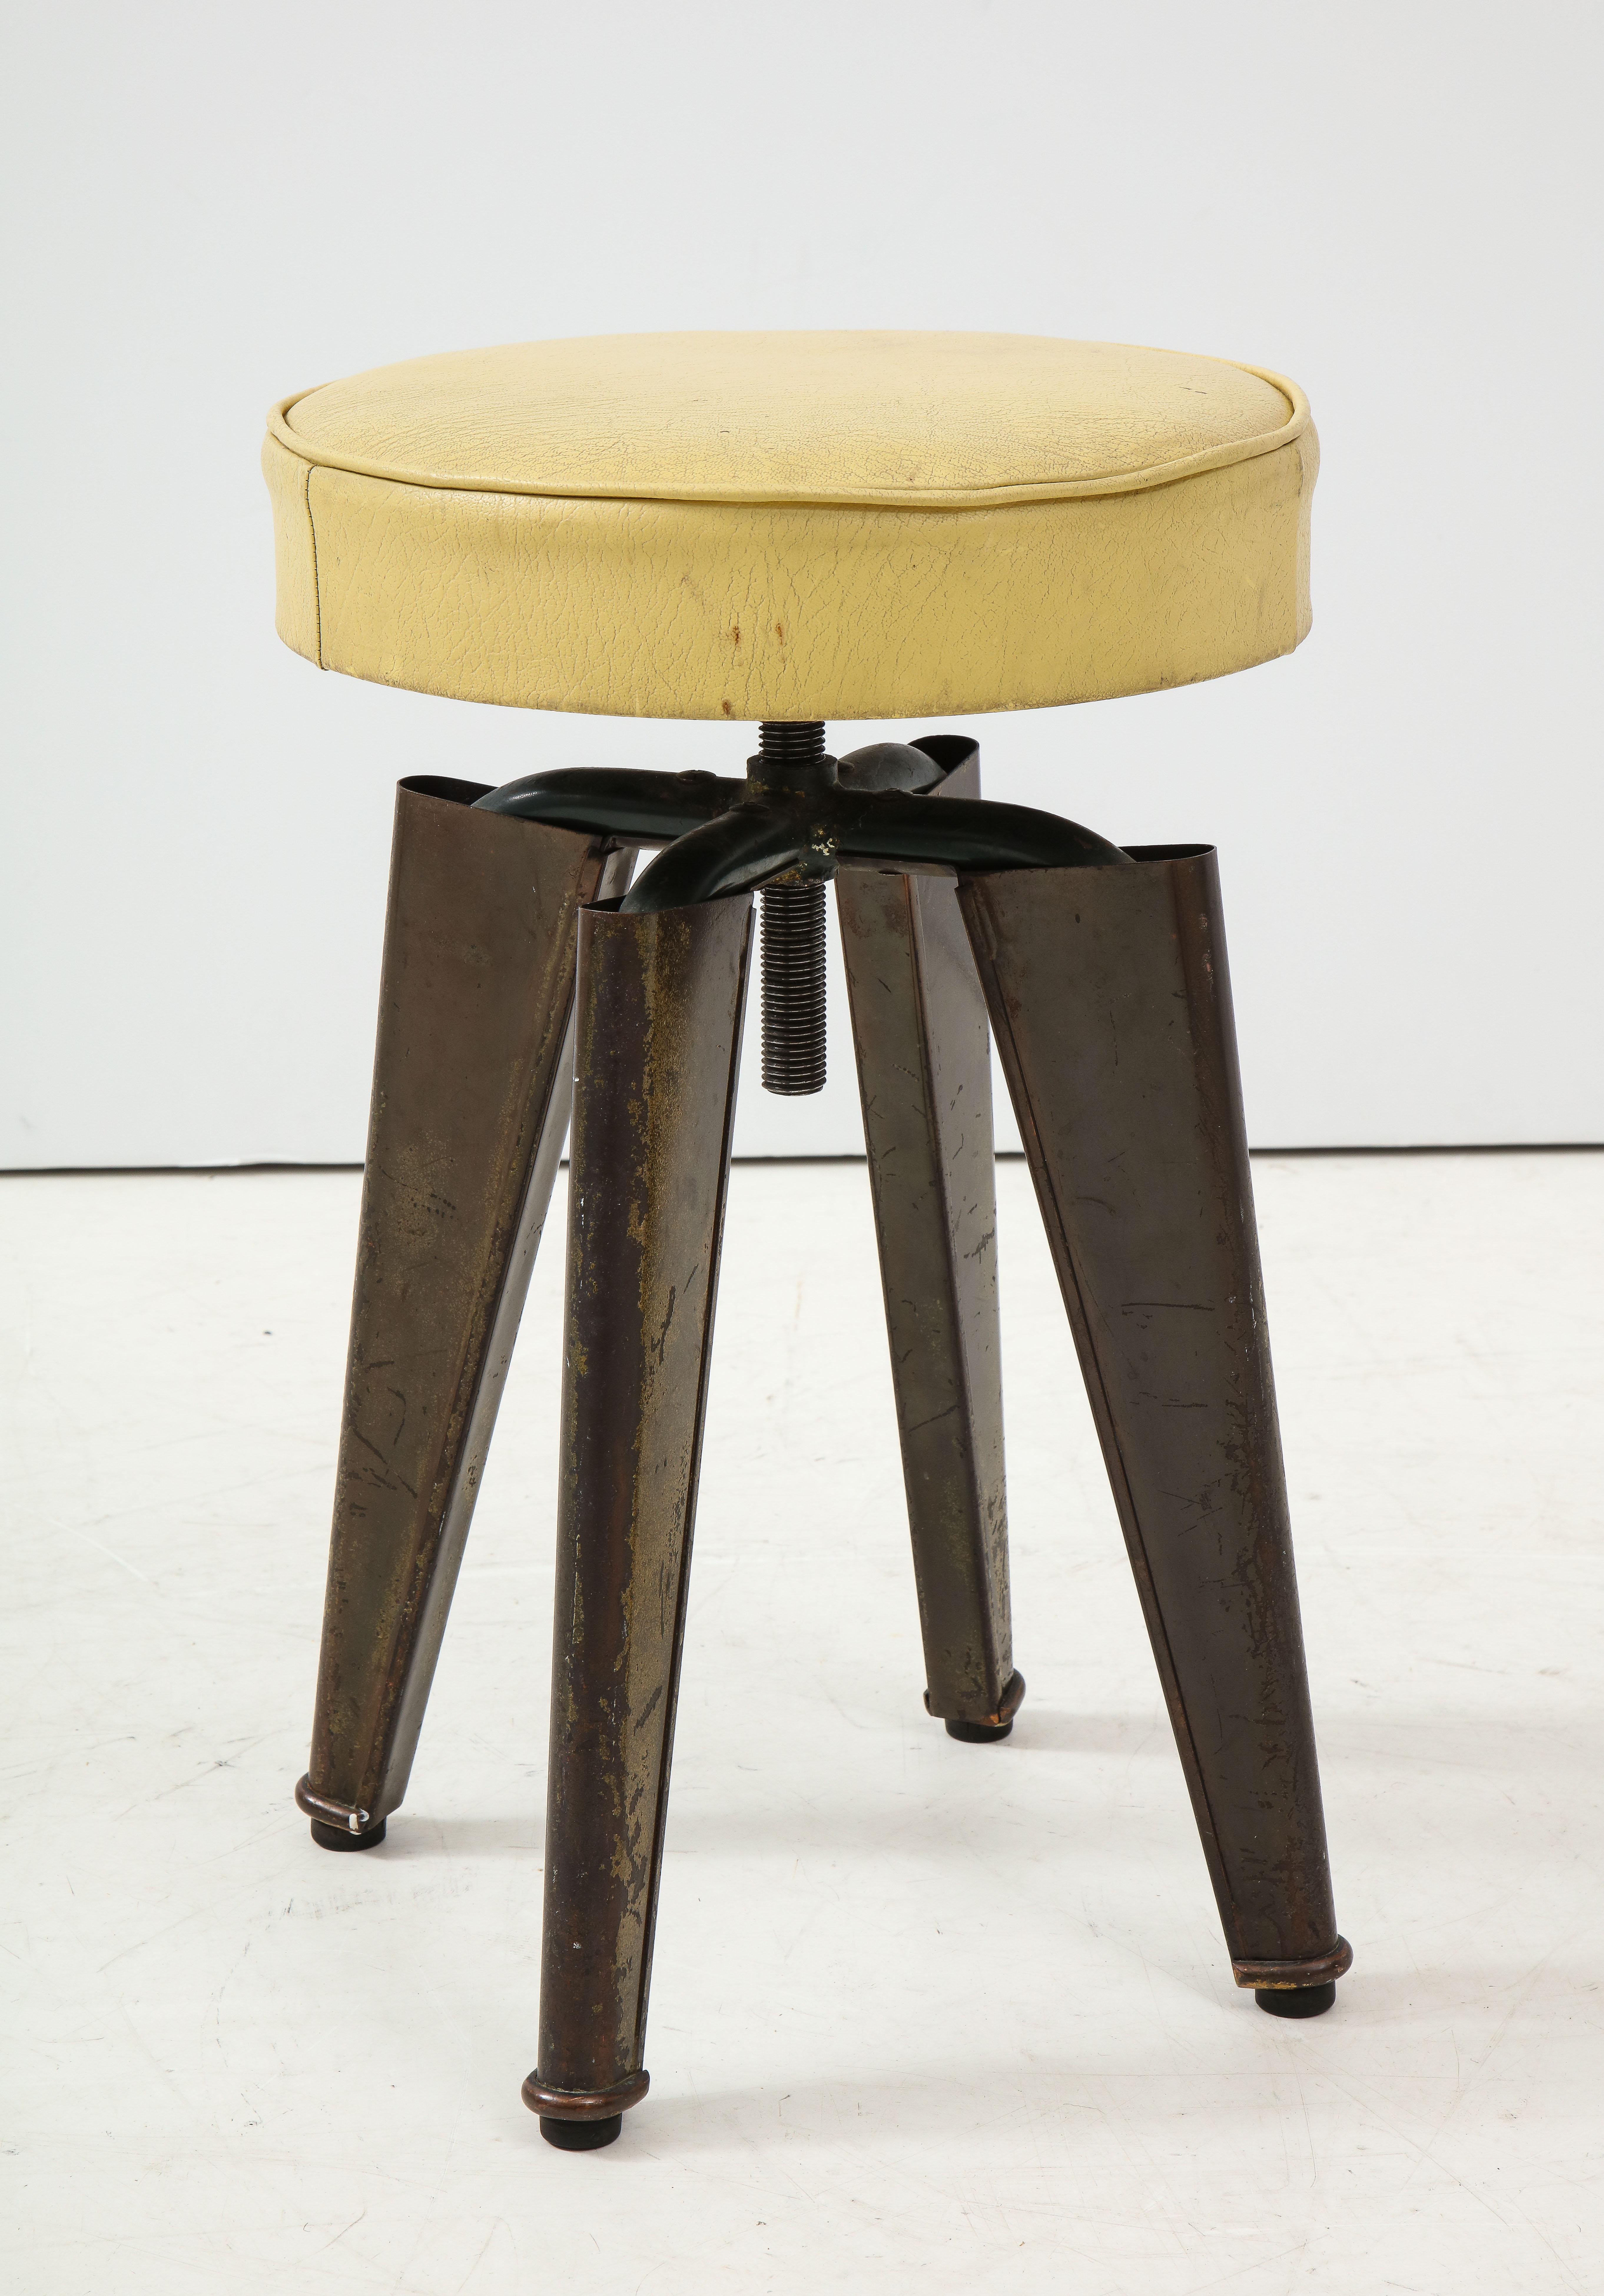 French Maison Dominique Clemenceau Stool, Andre Domin & Marcel Geneviere, France, 1957